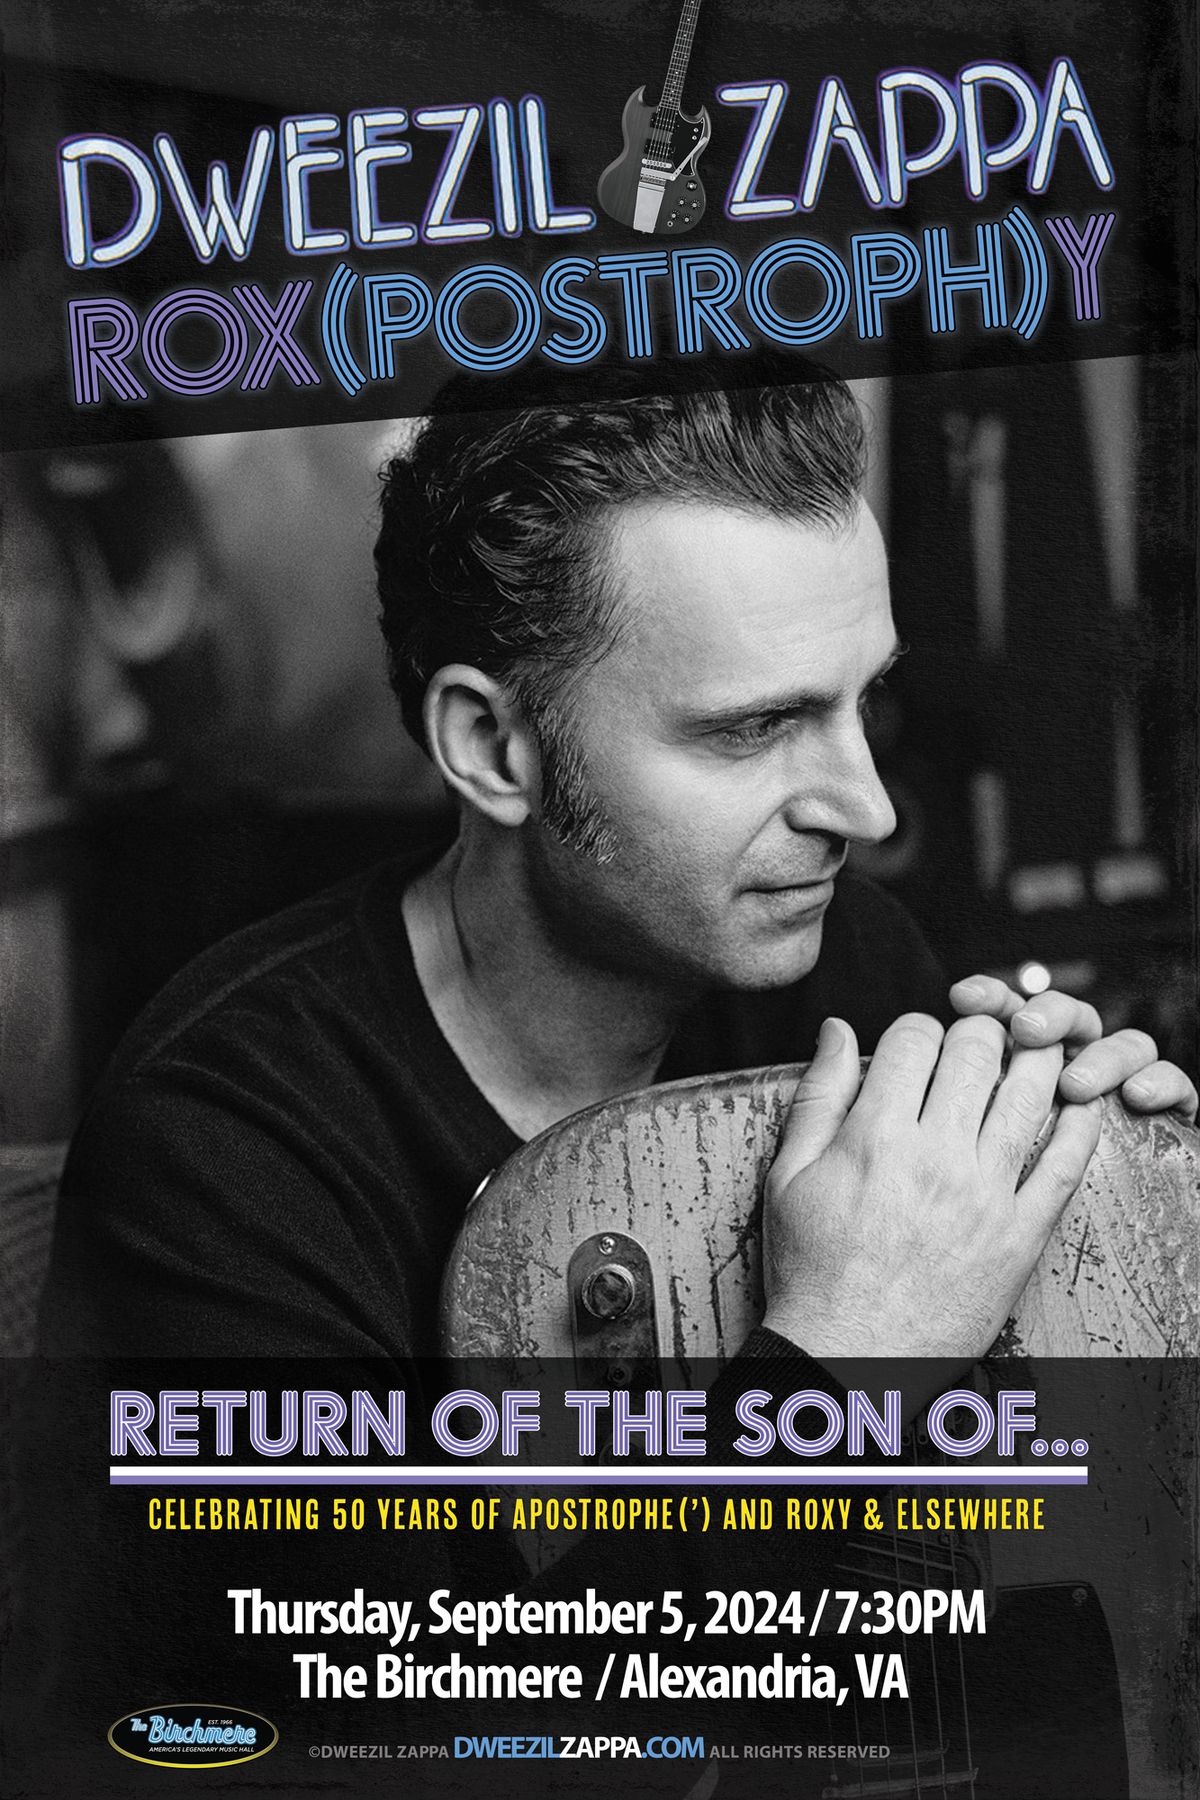 SOLD OUT! Dweezil Zappa - The Rox(Postroph)y Tour